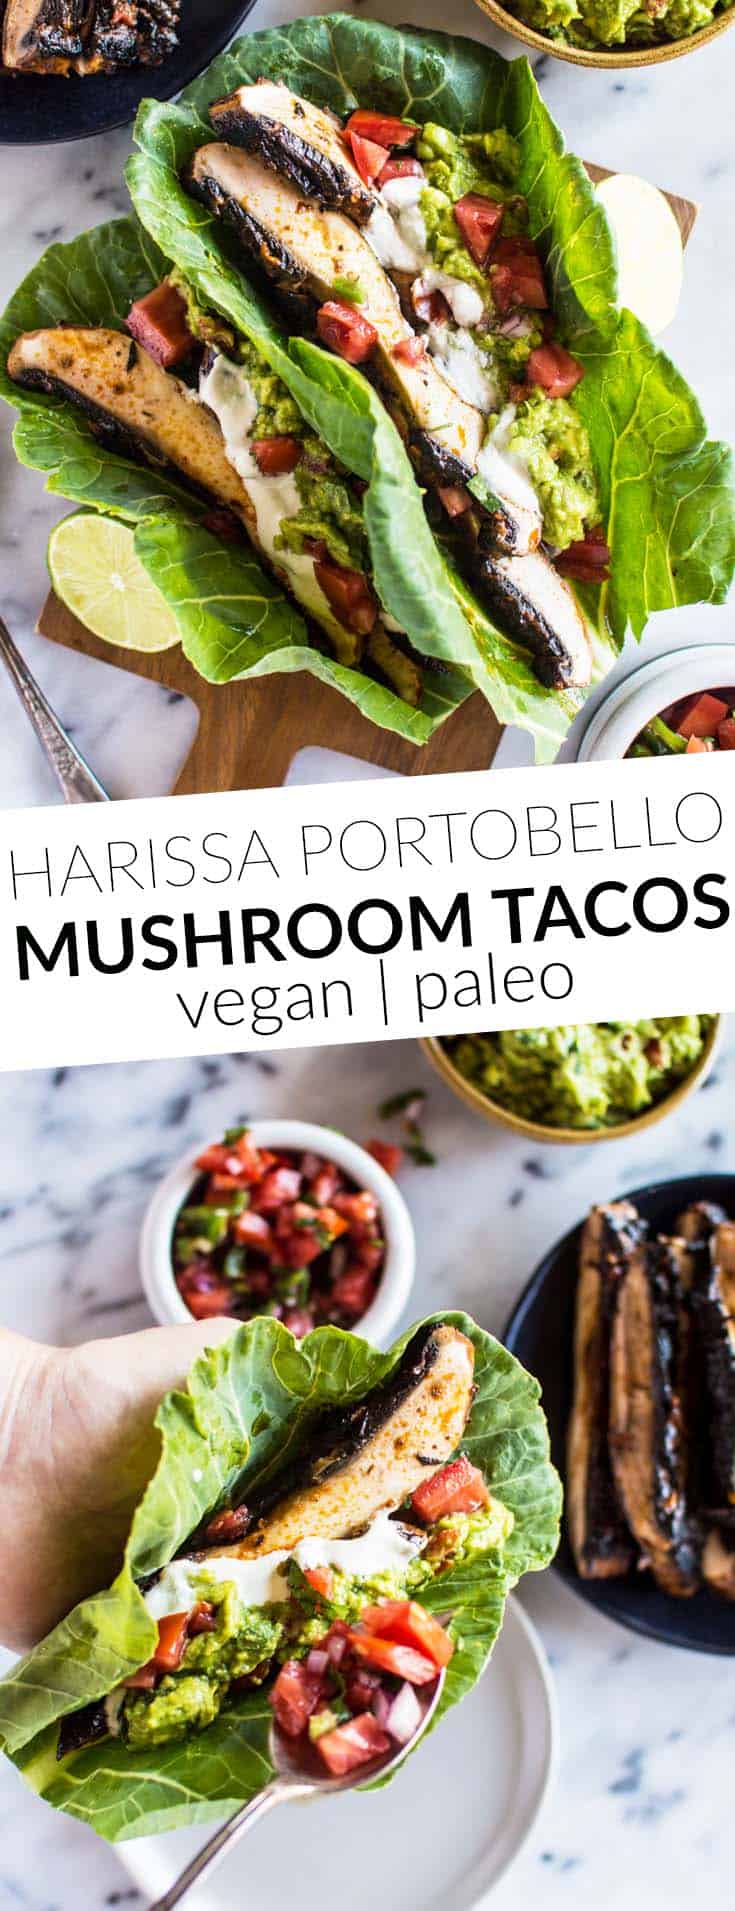 Harissa Portobello Mushroom Tacos - lighten up your tacos with collard greens! These tacos are ready in under 30 minutes! vegan, gluten-free, paleo, whole30-friendly. by @healthynibs